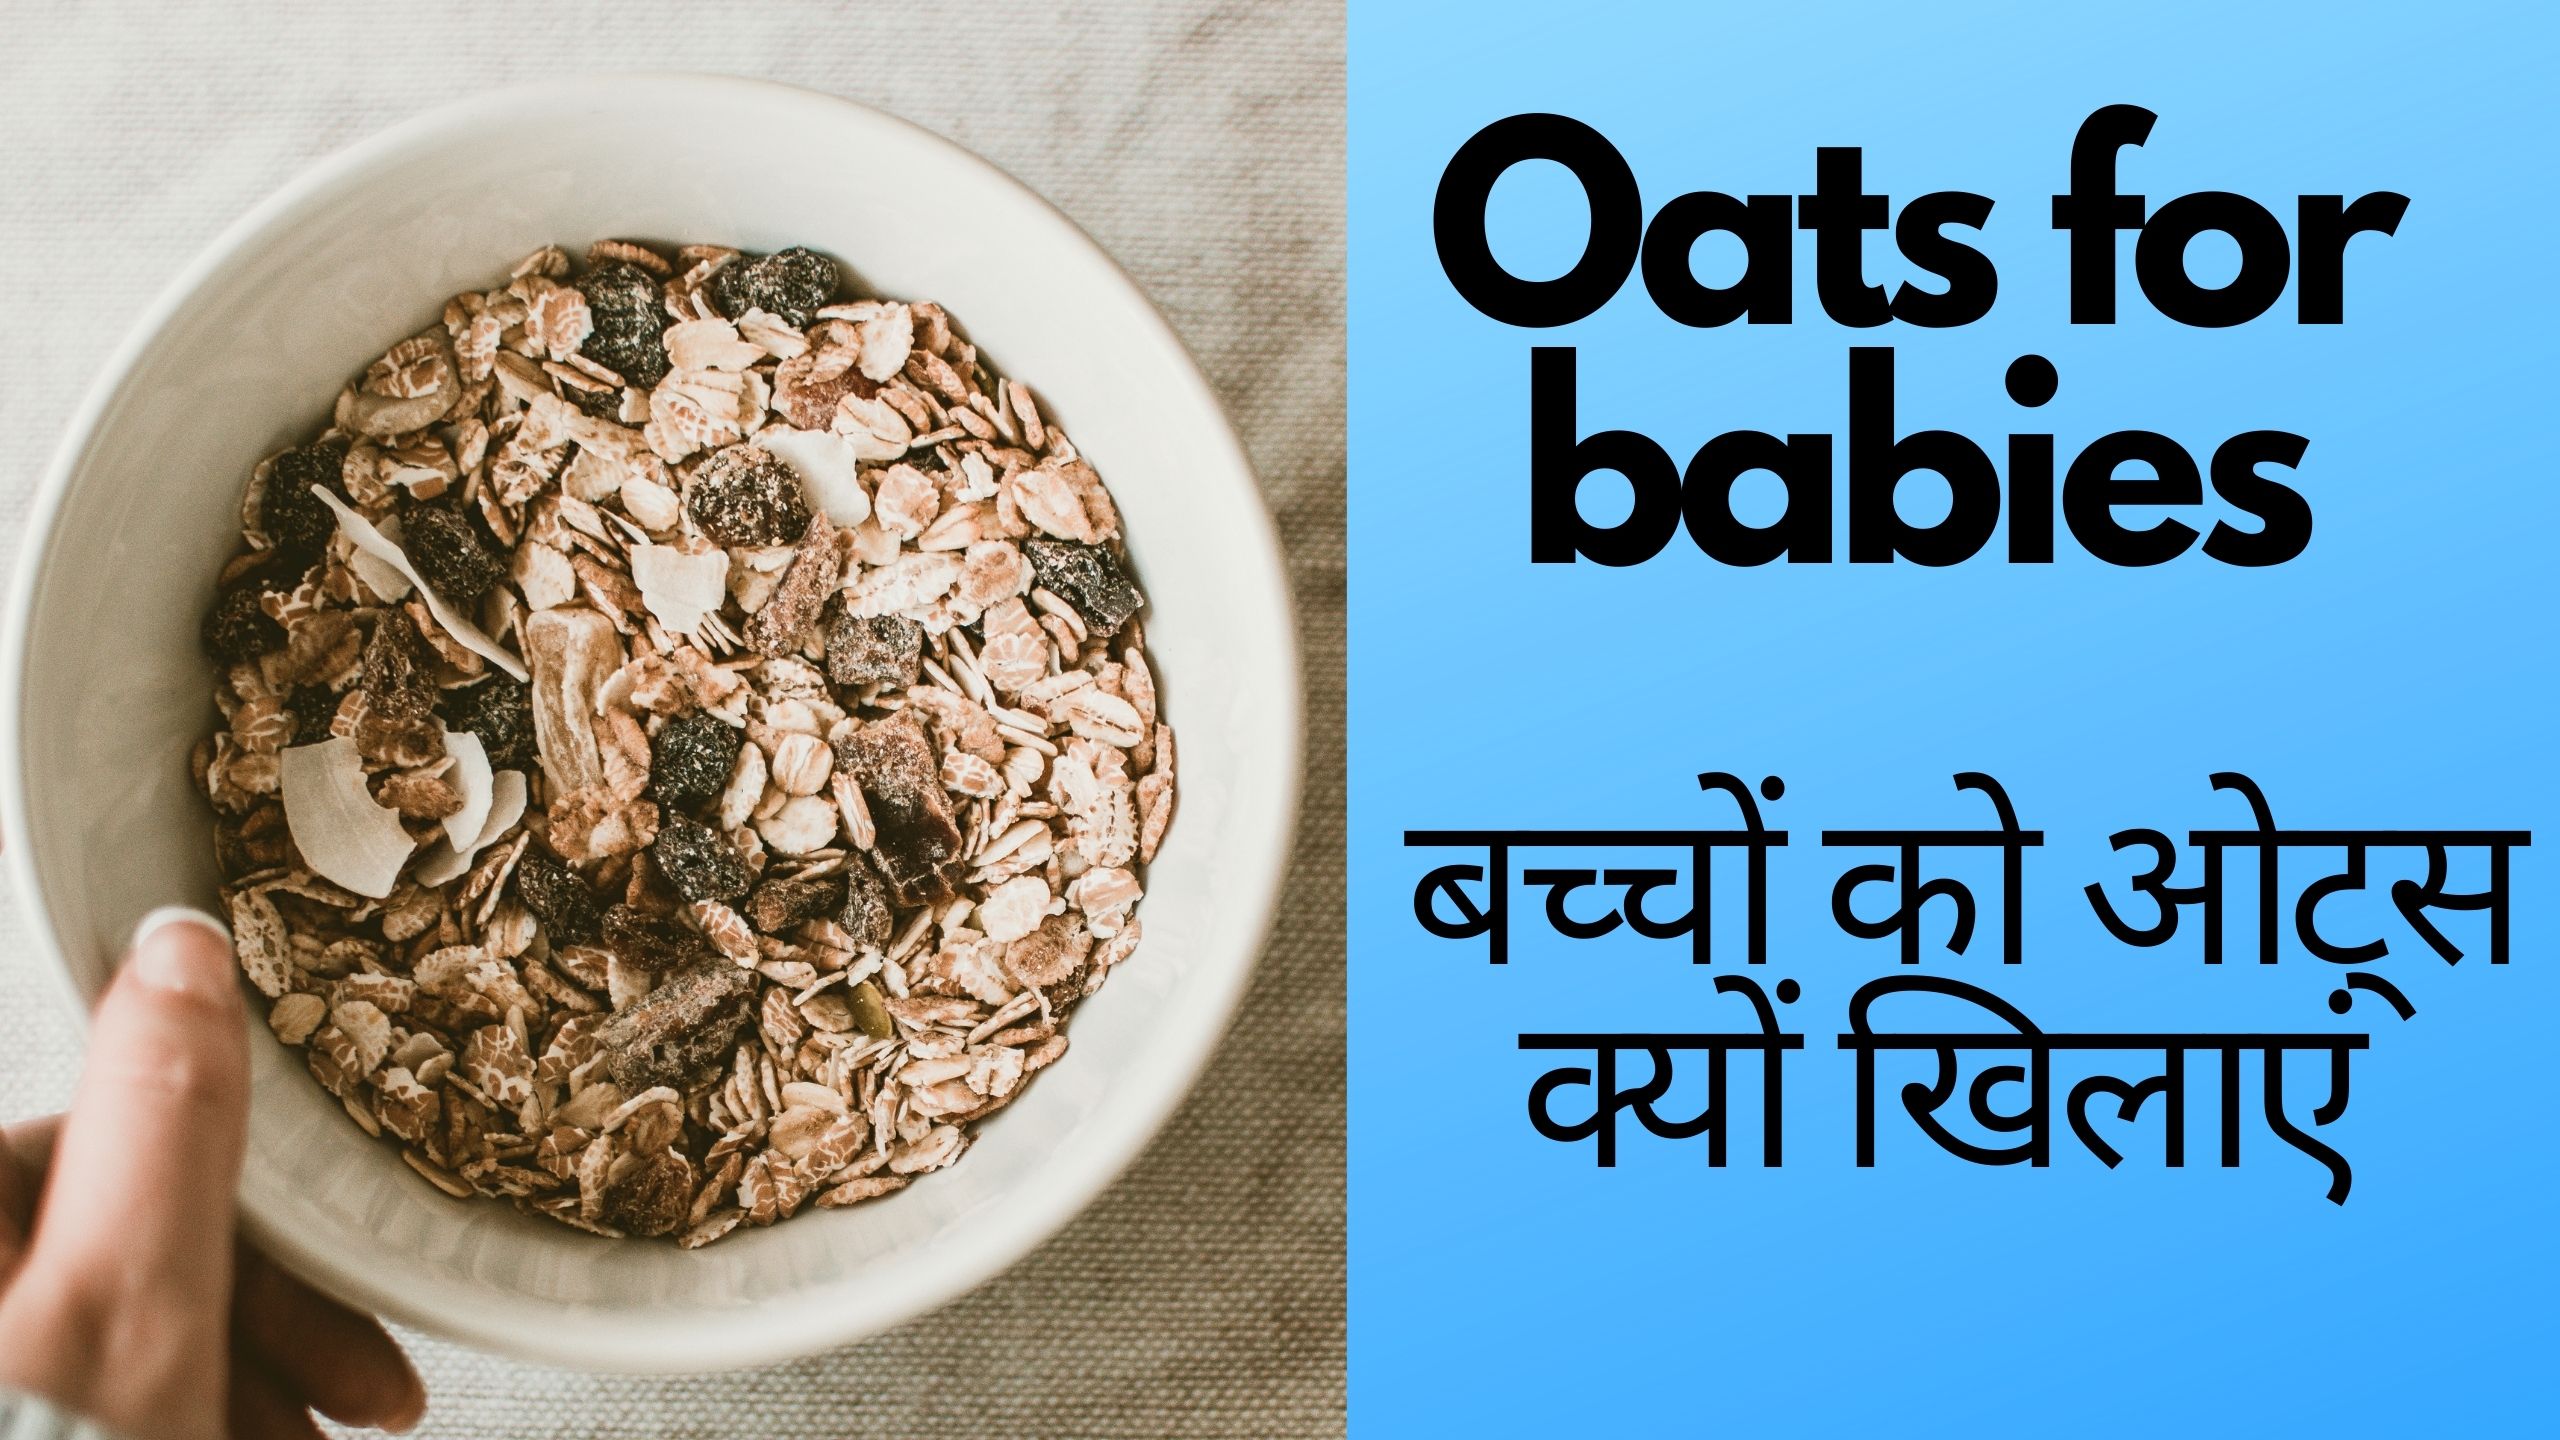 Oats for babies